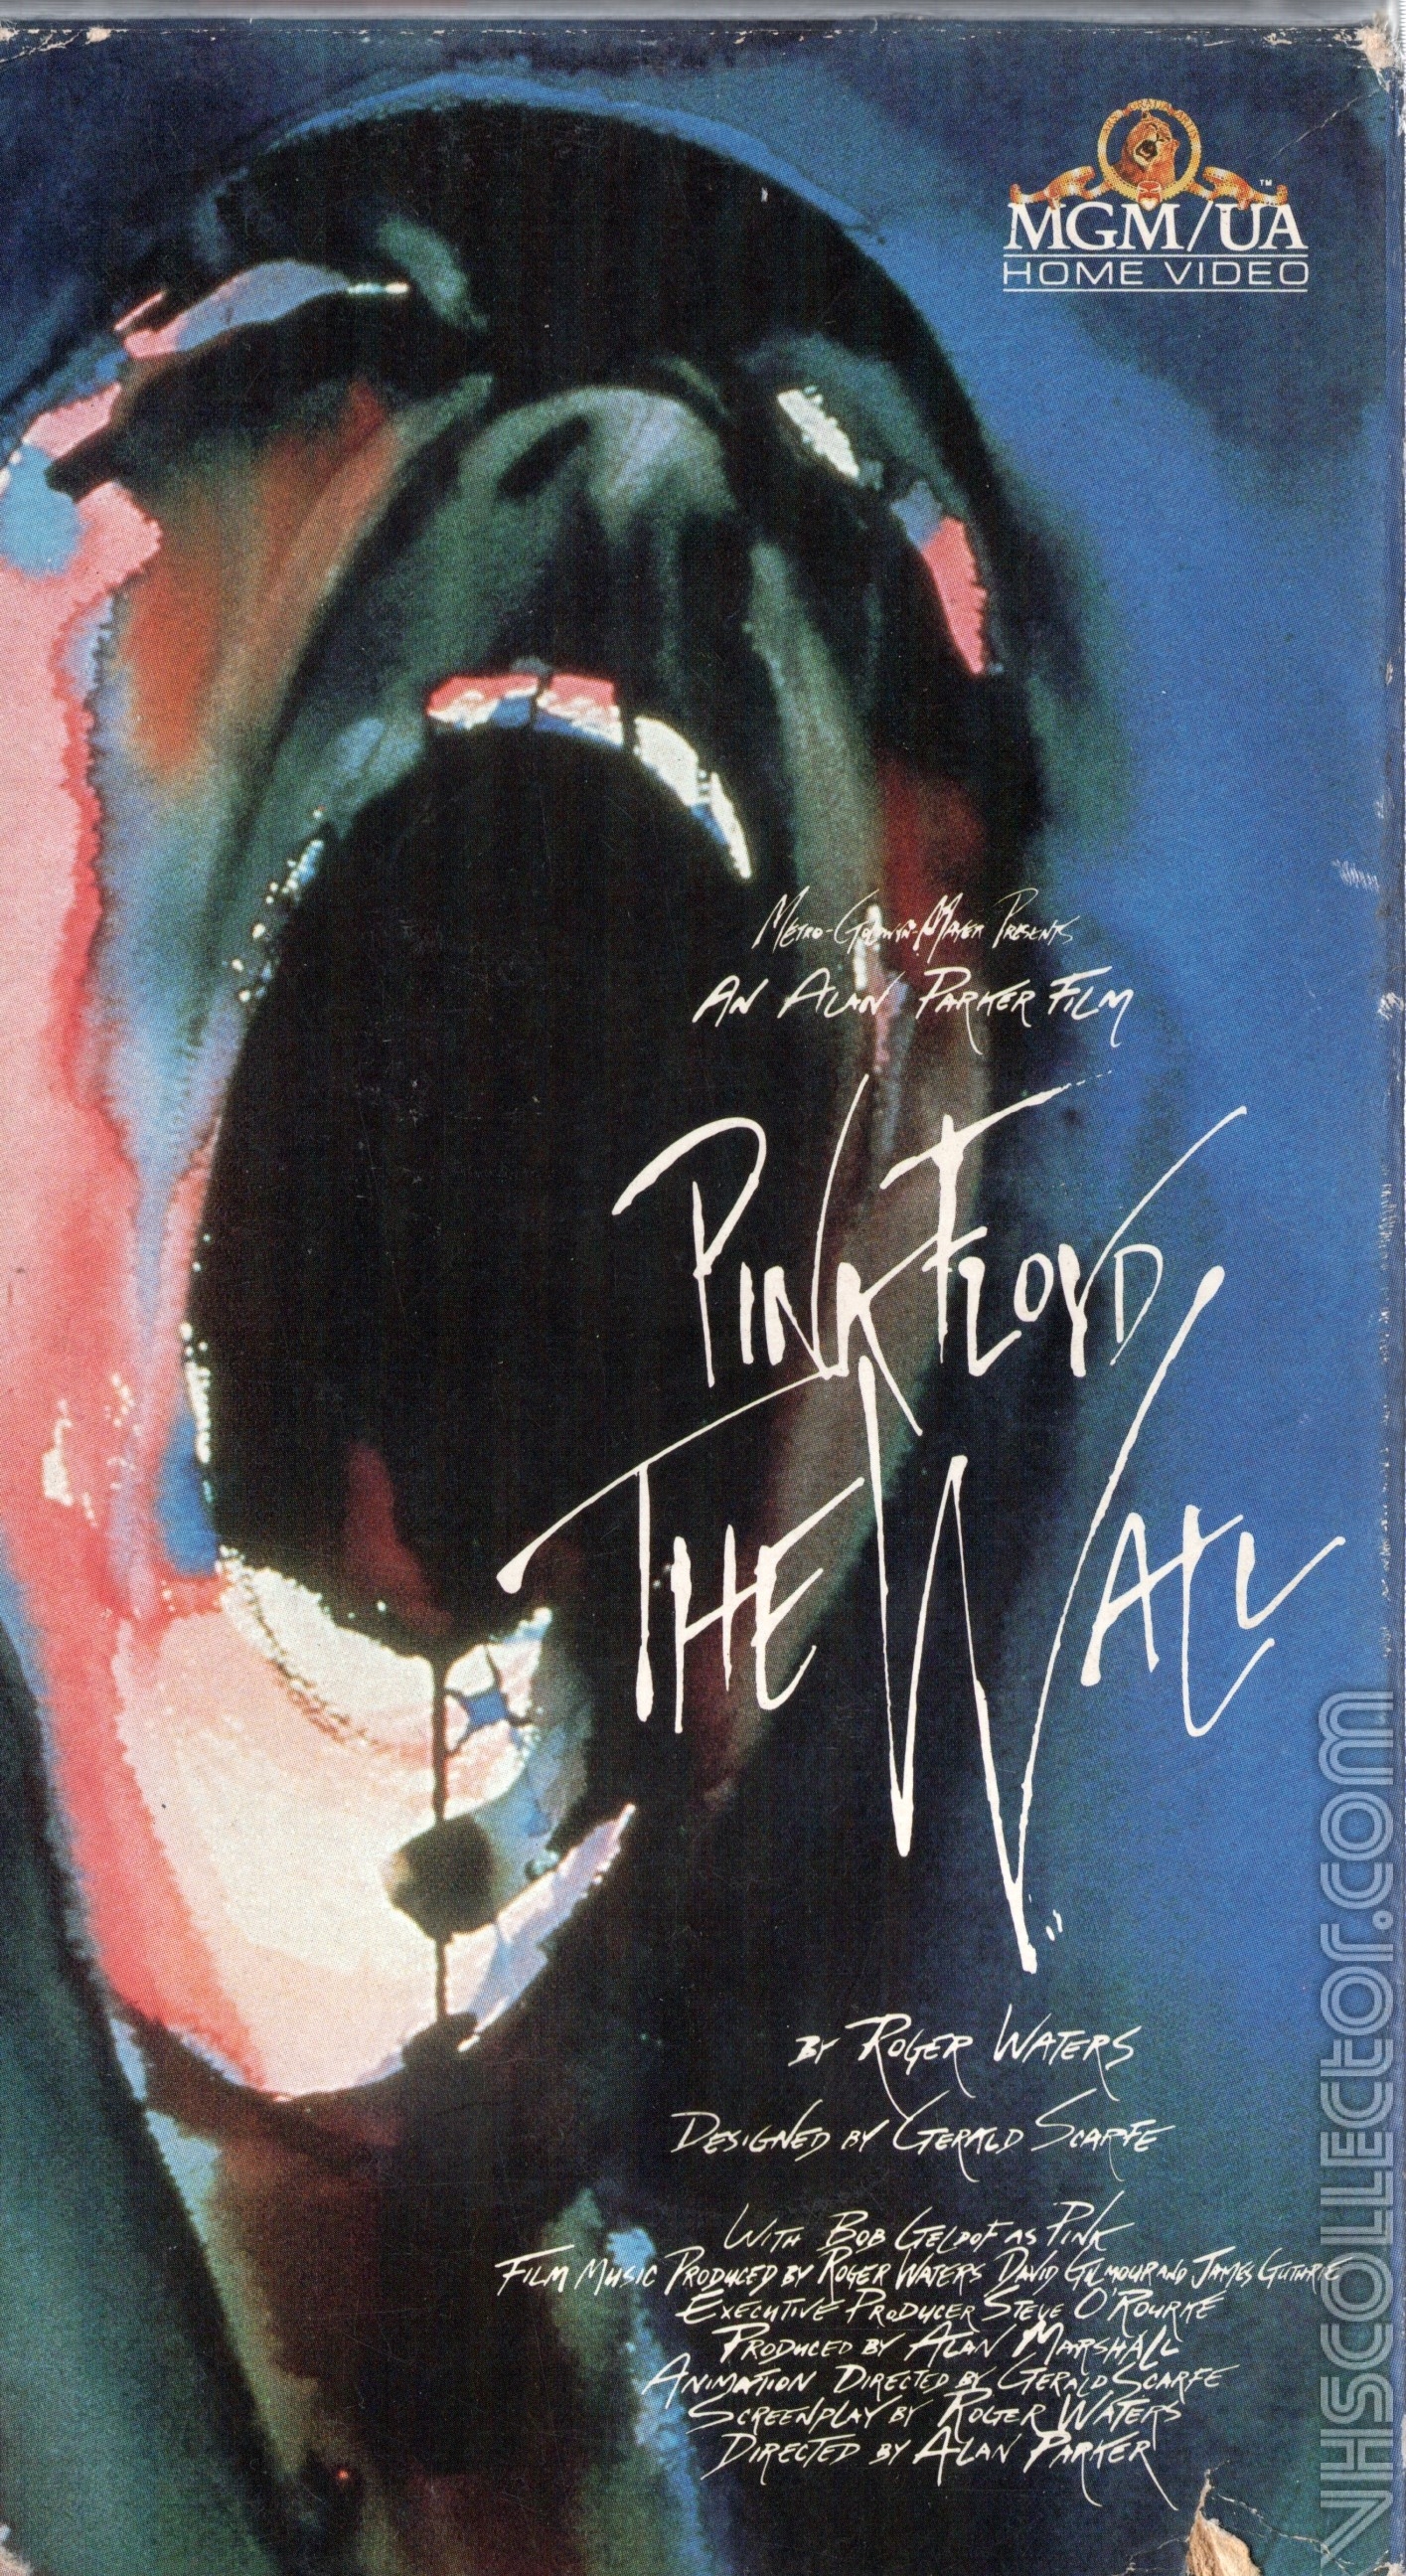 Pink Floyd: The Wall | VHSCollector.com